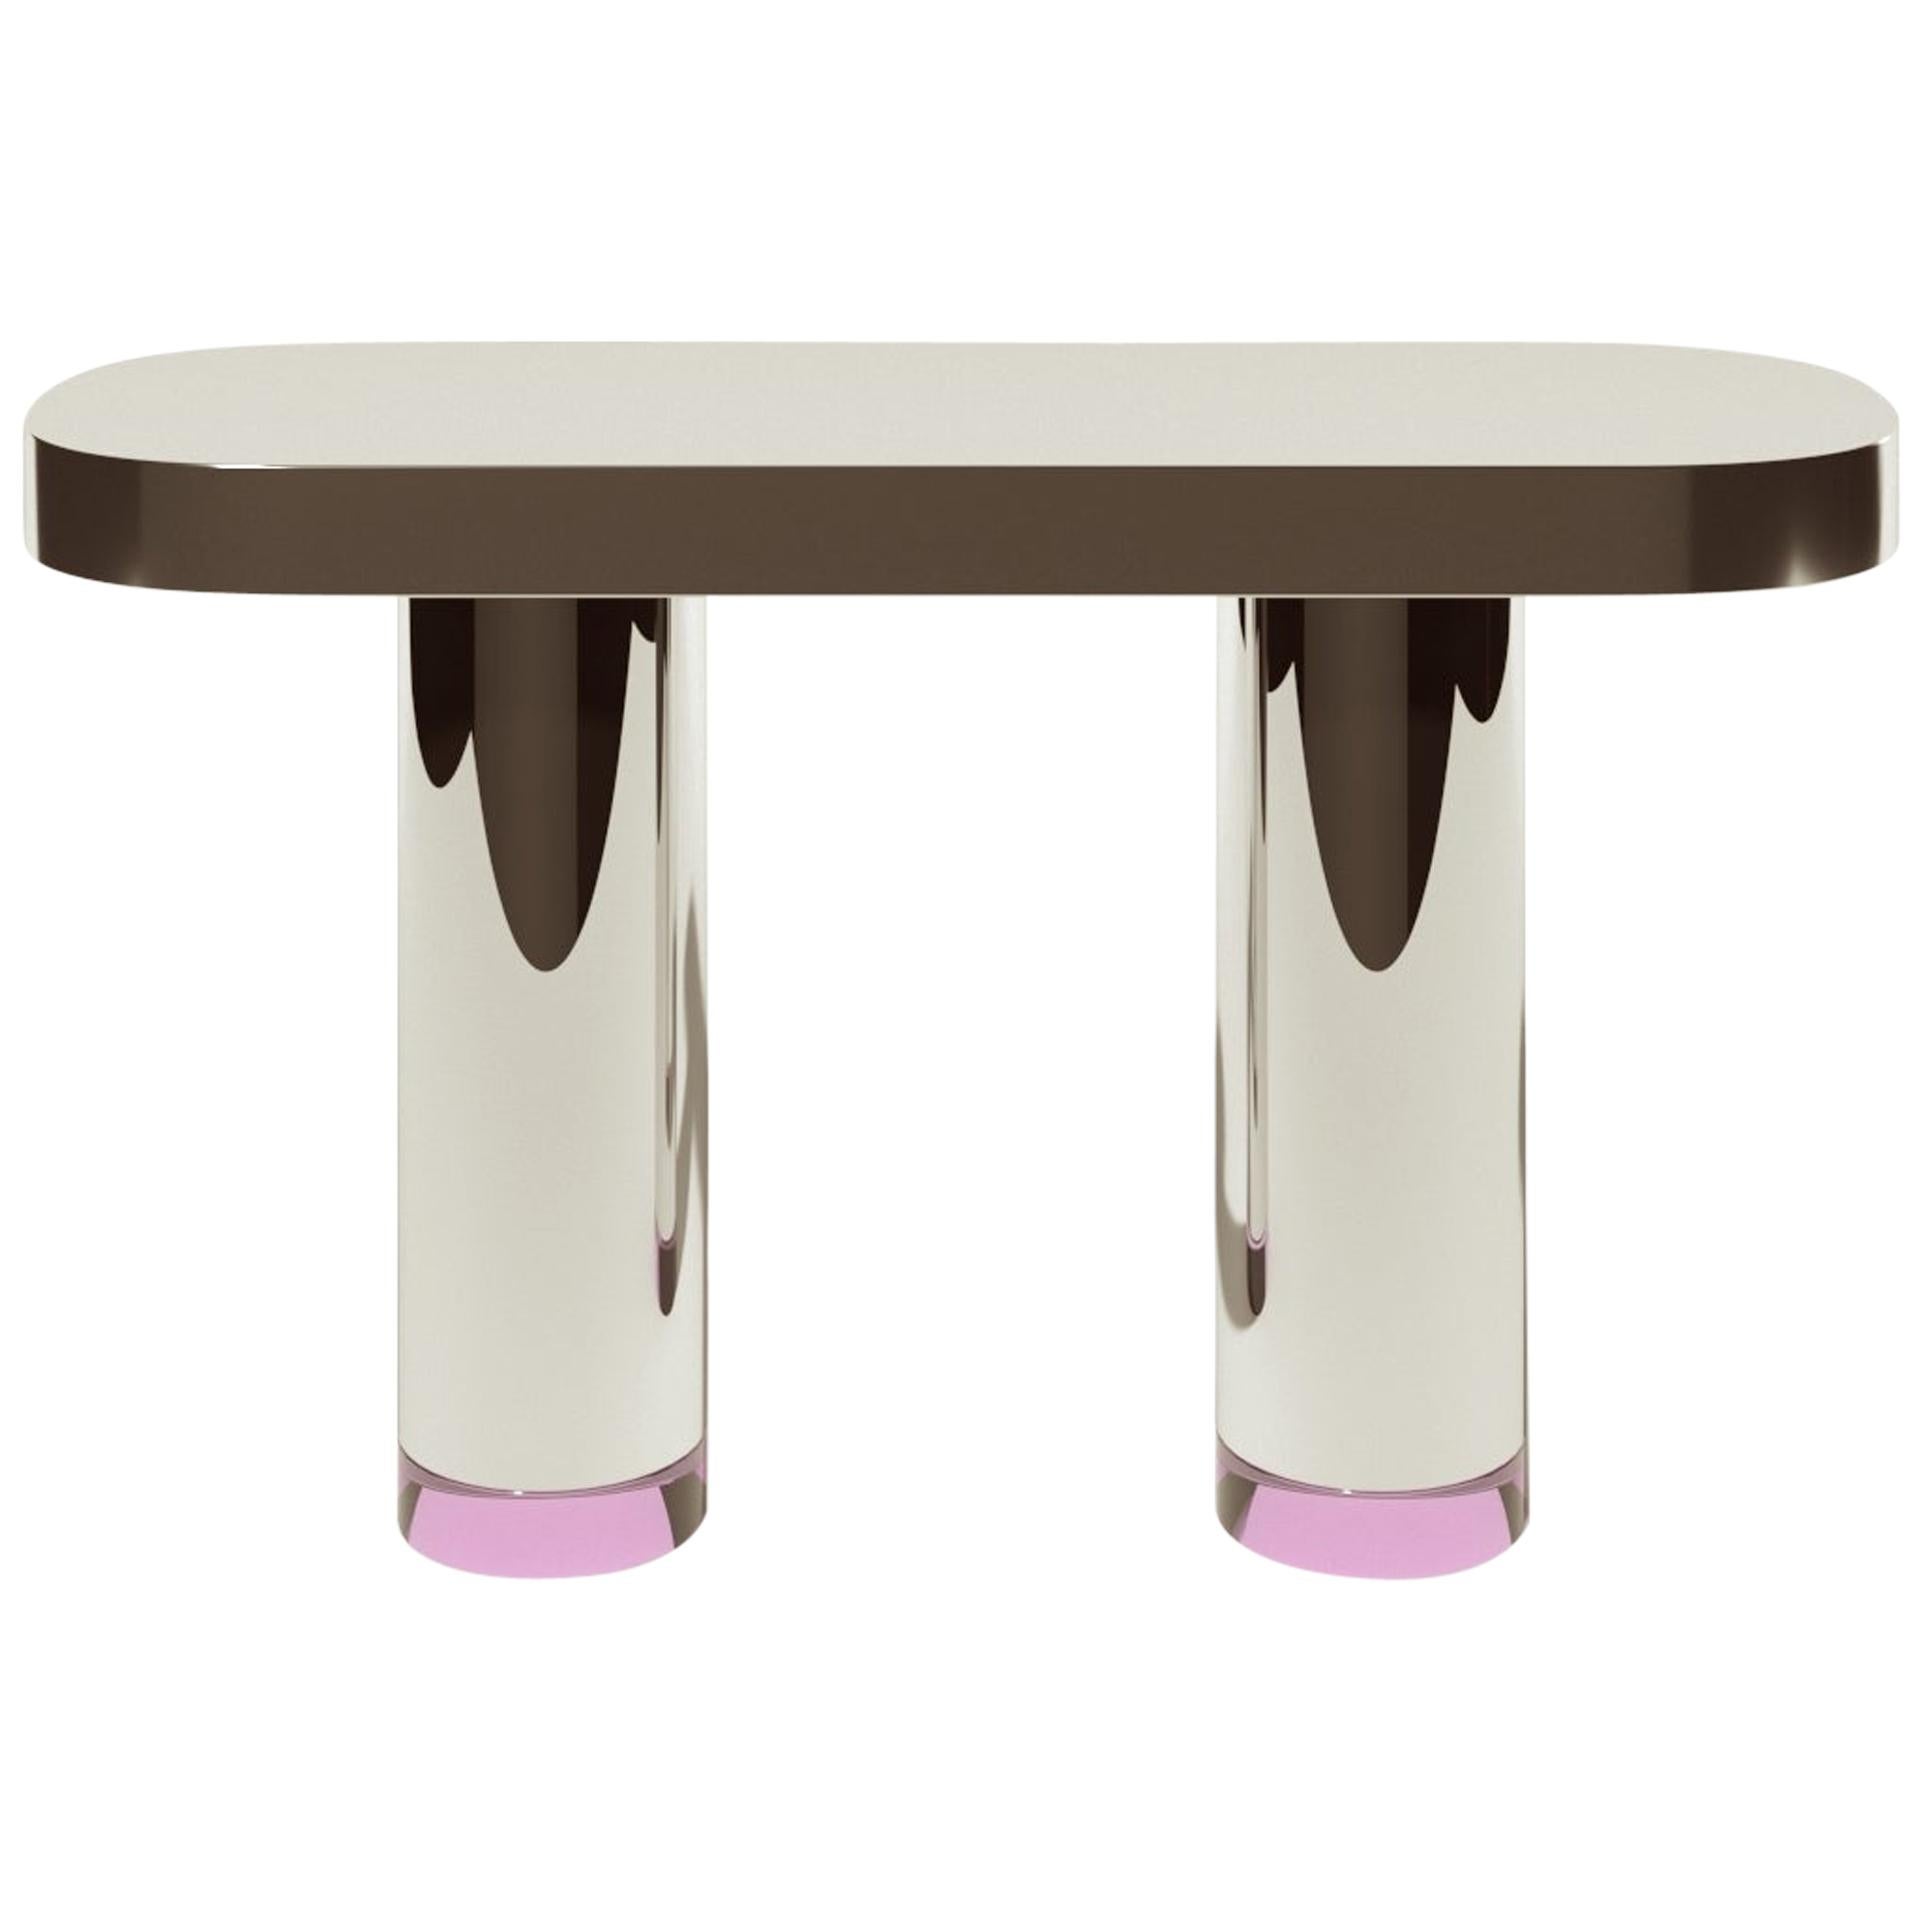 Dolmen Model Console Table by Studio Superego, Italy